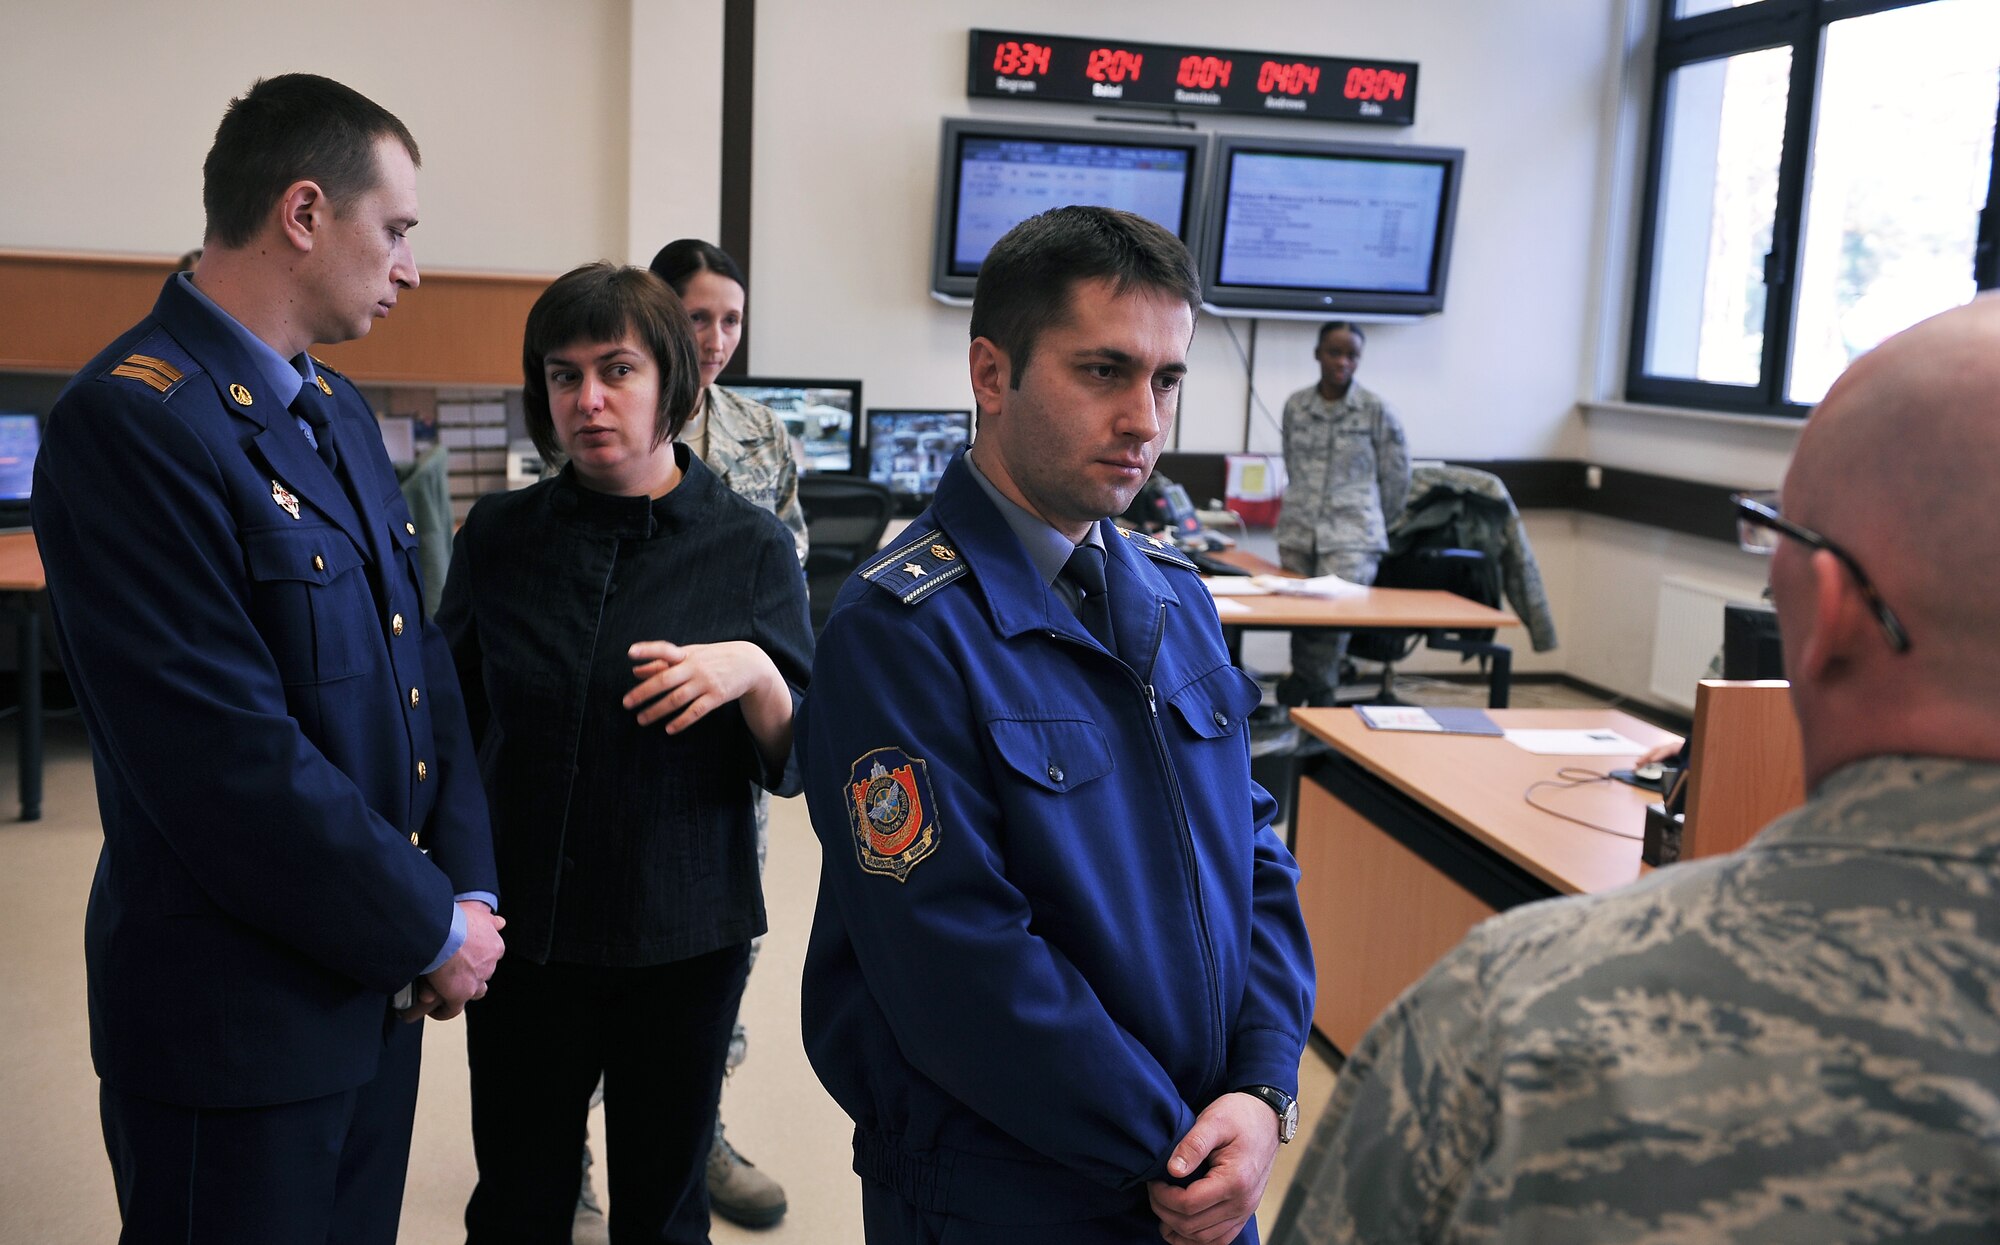 Maj. Wayne P. Hodson, 86th Medical Dental Operations Squadron commander, gives Ukrainian military members a tour of the Contingency Aeromedical Staging Facility, March 5, 2013, Ramstein Air Base, Germany. Members of the Ukrainian military visited the NCO academy to continue their professional military education operations and increase their knowledge in enlisted empowerment and leadership. (U.S. Air Force photo/Airman 1st Class Dymekre Allen)